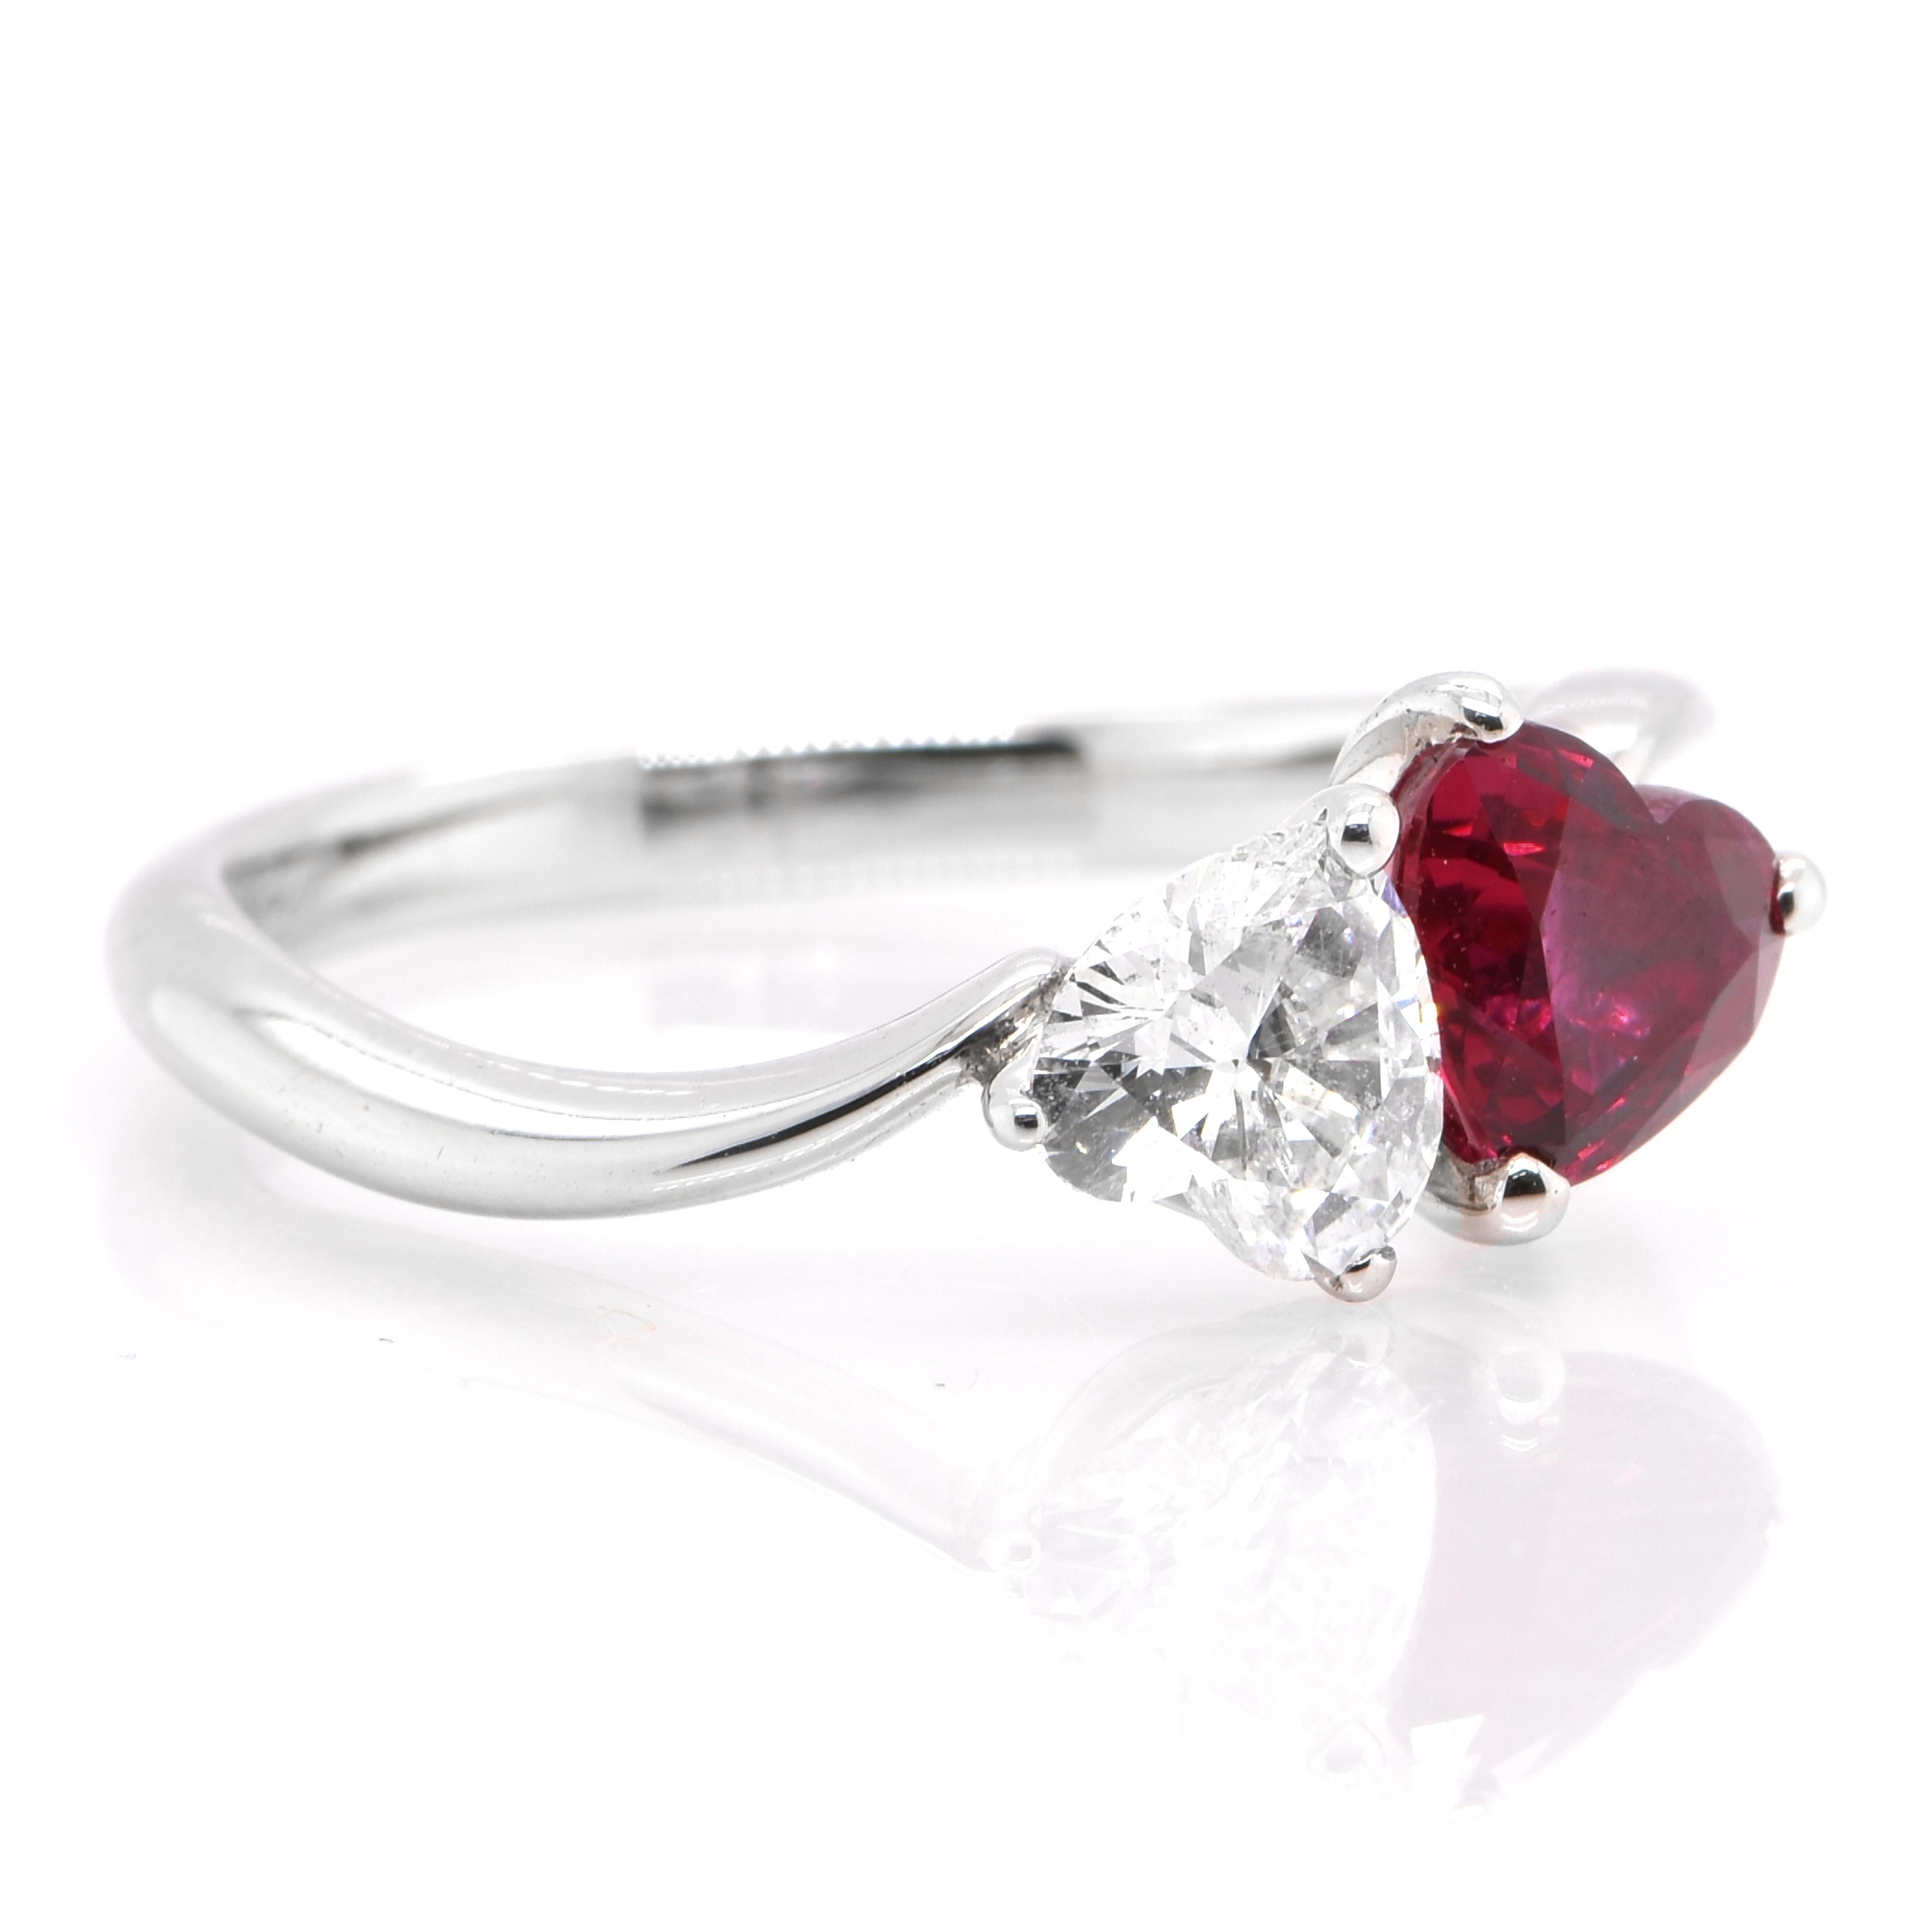 Modern 1.05 Carat Natural Heart-Cut Ruby and Diamond Ring set in Platinum